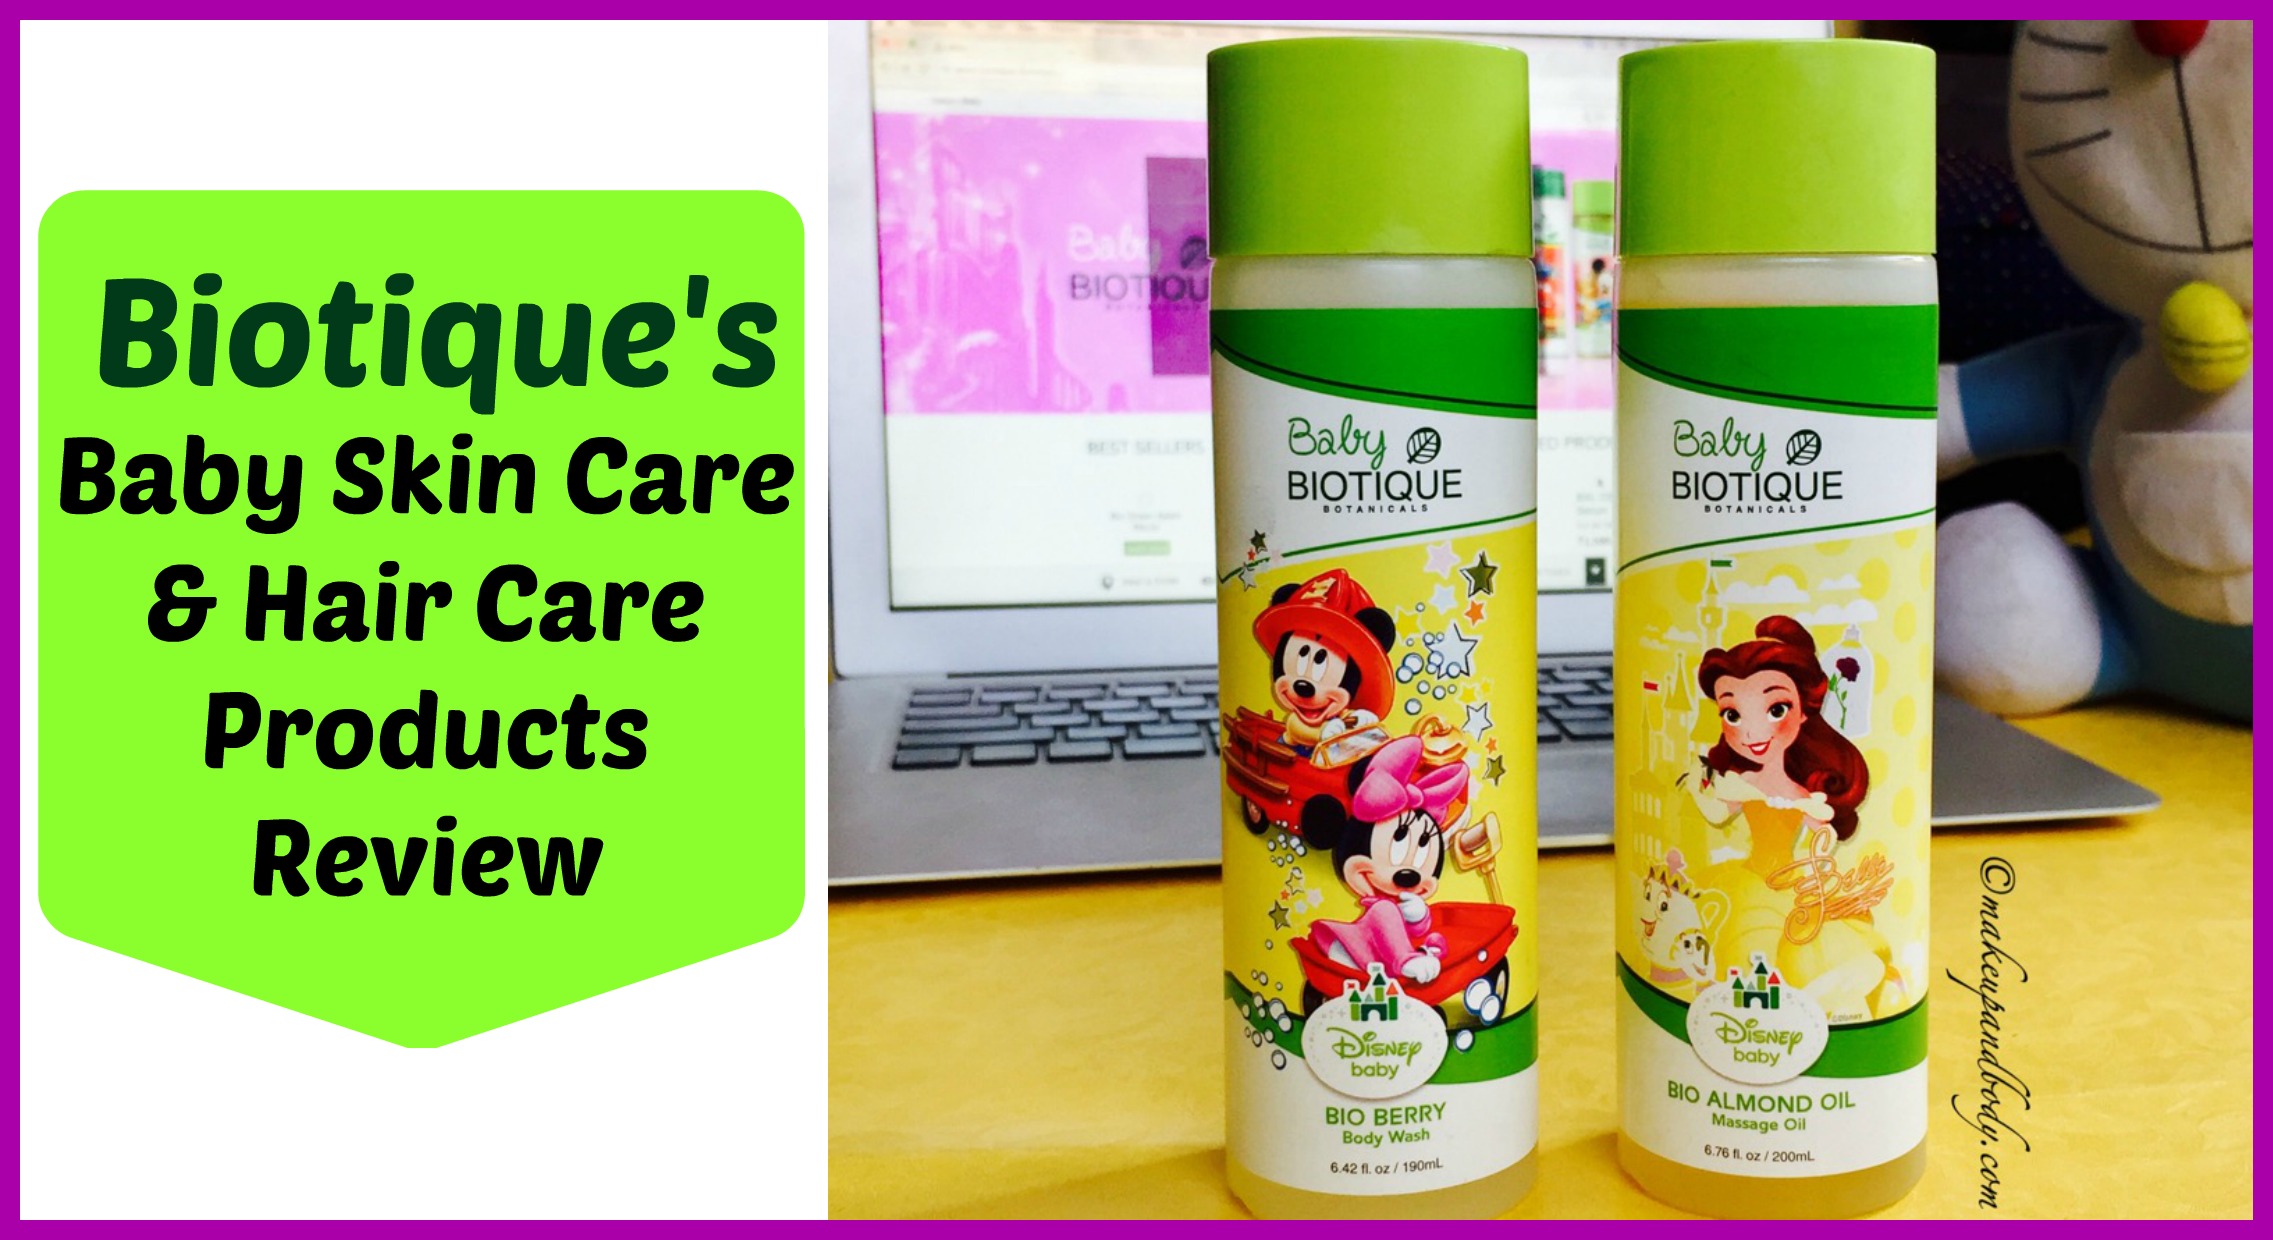 Biotique's Baby Skin Care & Hair Care Products Review - Makeup and Body Blog